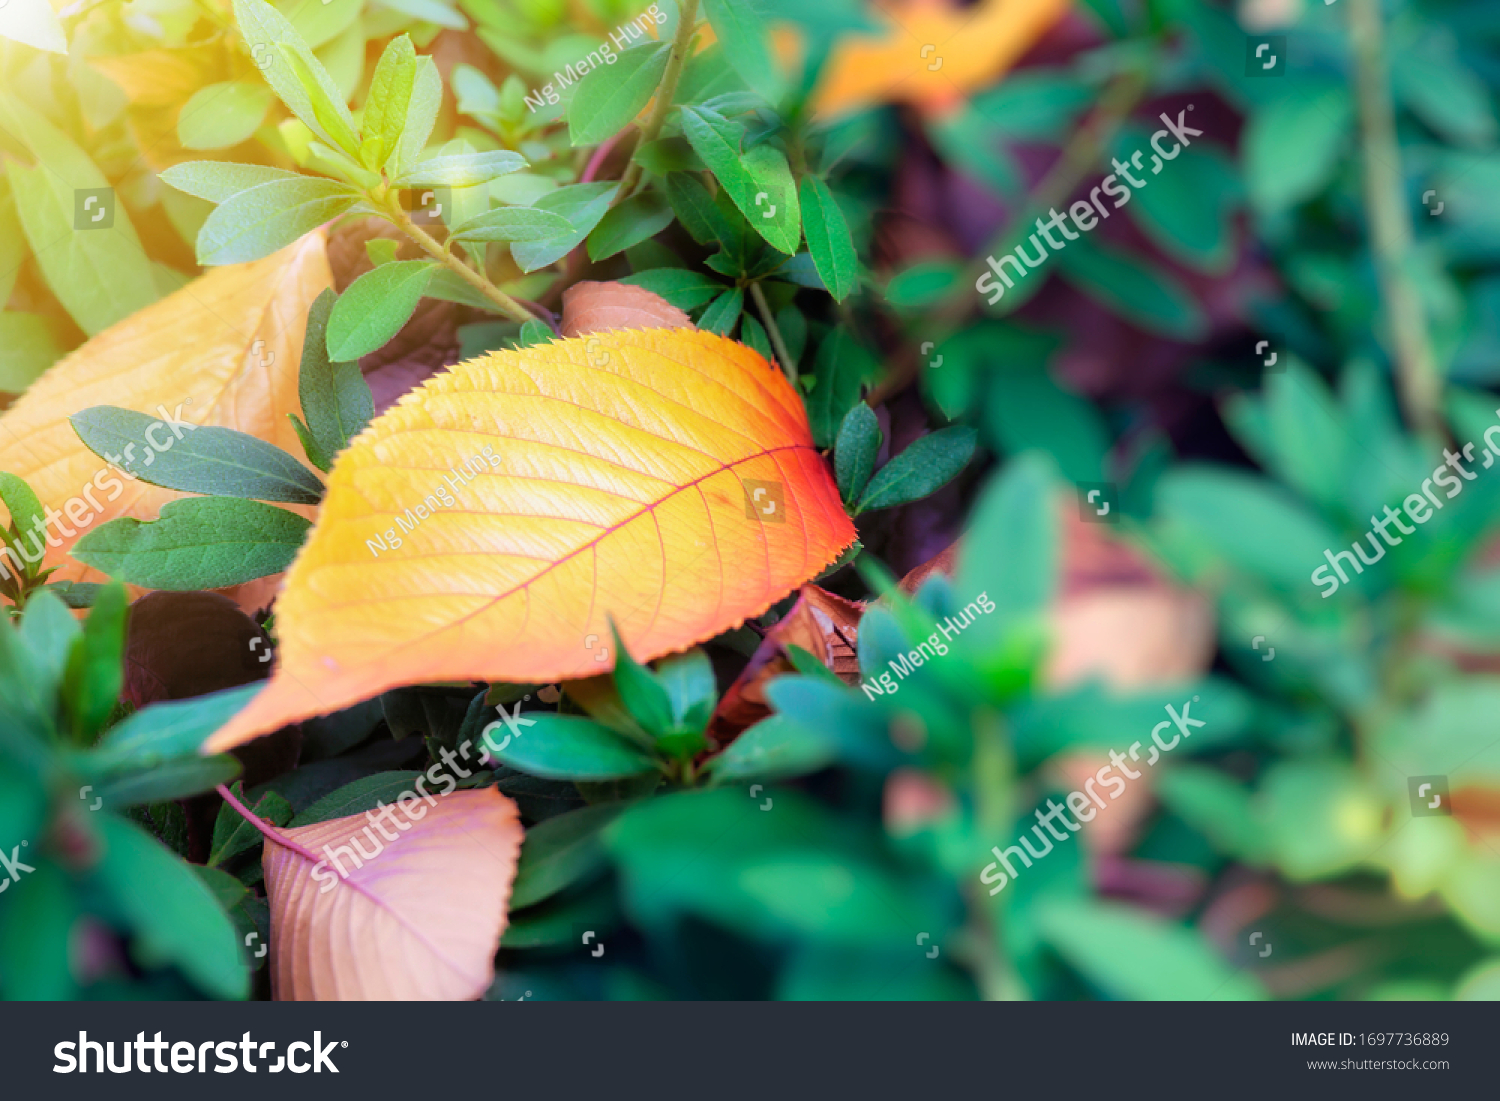 Orange dead leaves in the sun against a green leafy background #1697736889